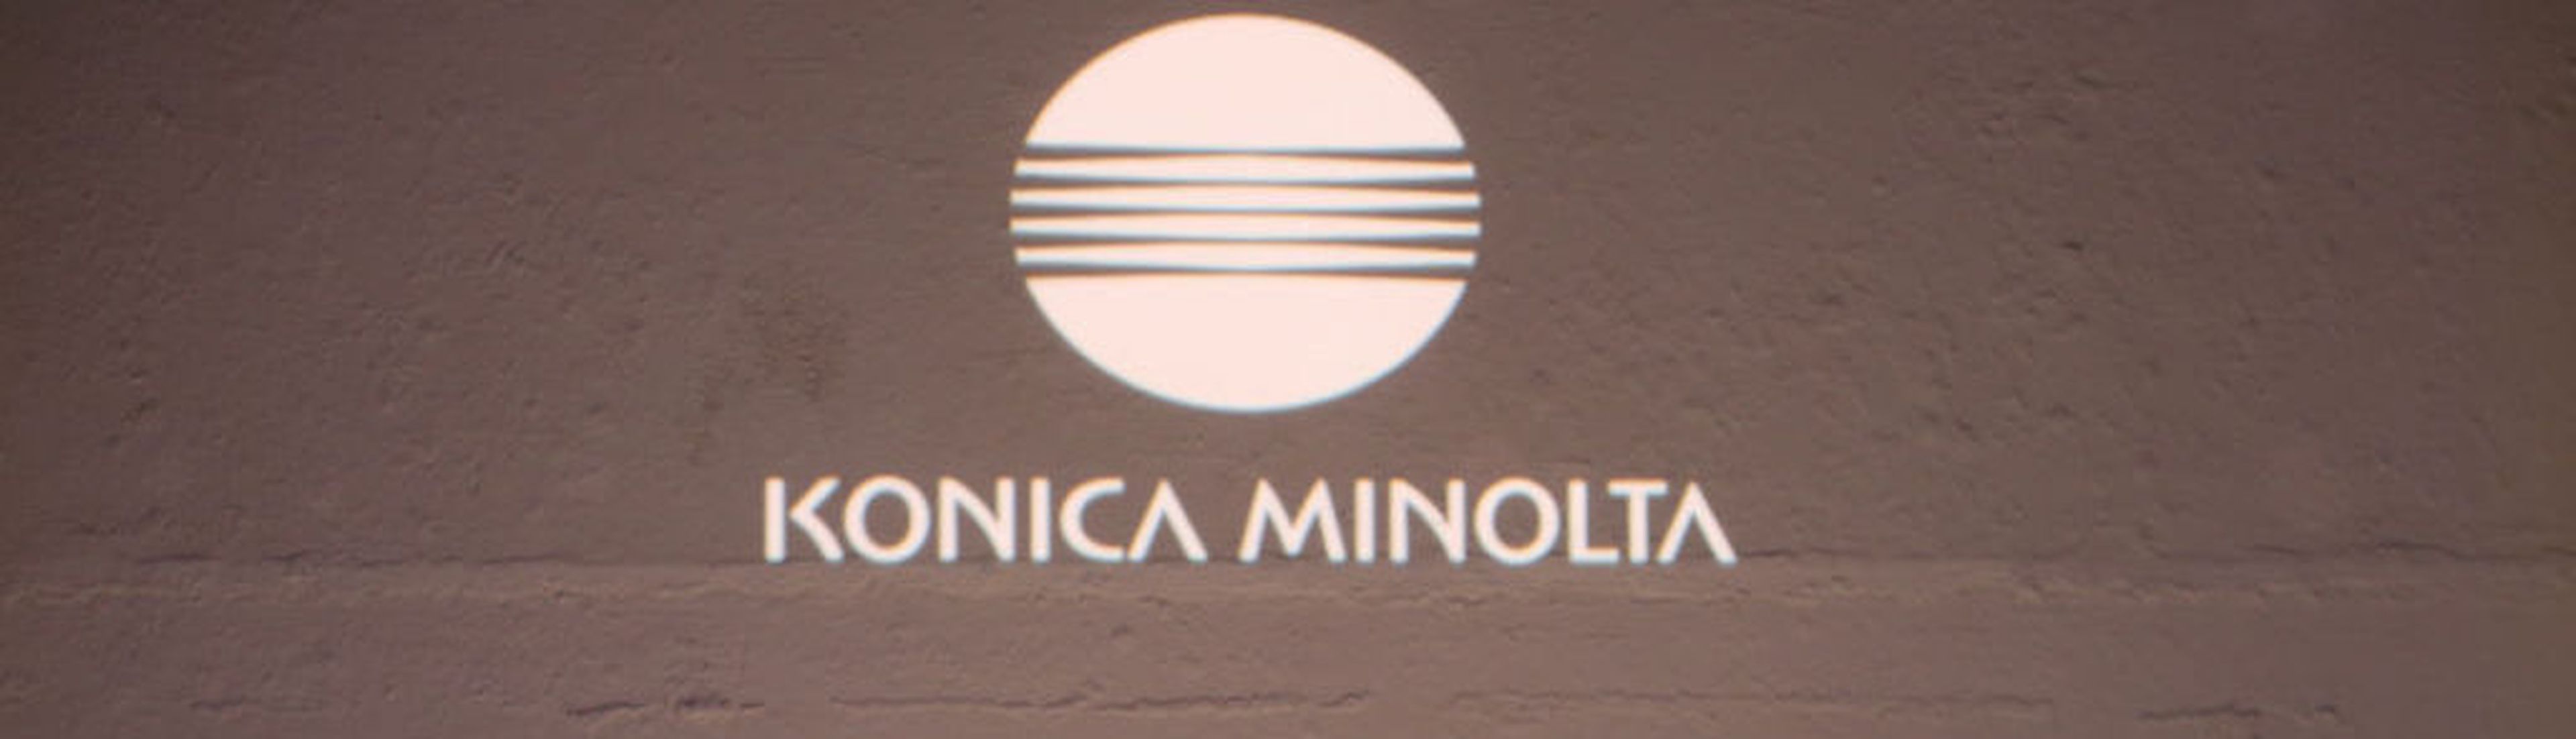 First name Surname speaks during Spotlight Live: the Konica Minolta Workplace Hub Launch at at Umspannwerk Alexanderplatz on March 23, 2017 in Berlin, Germany.